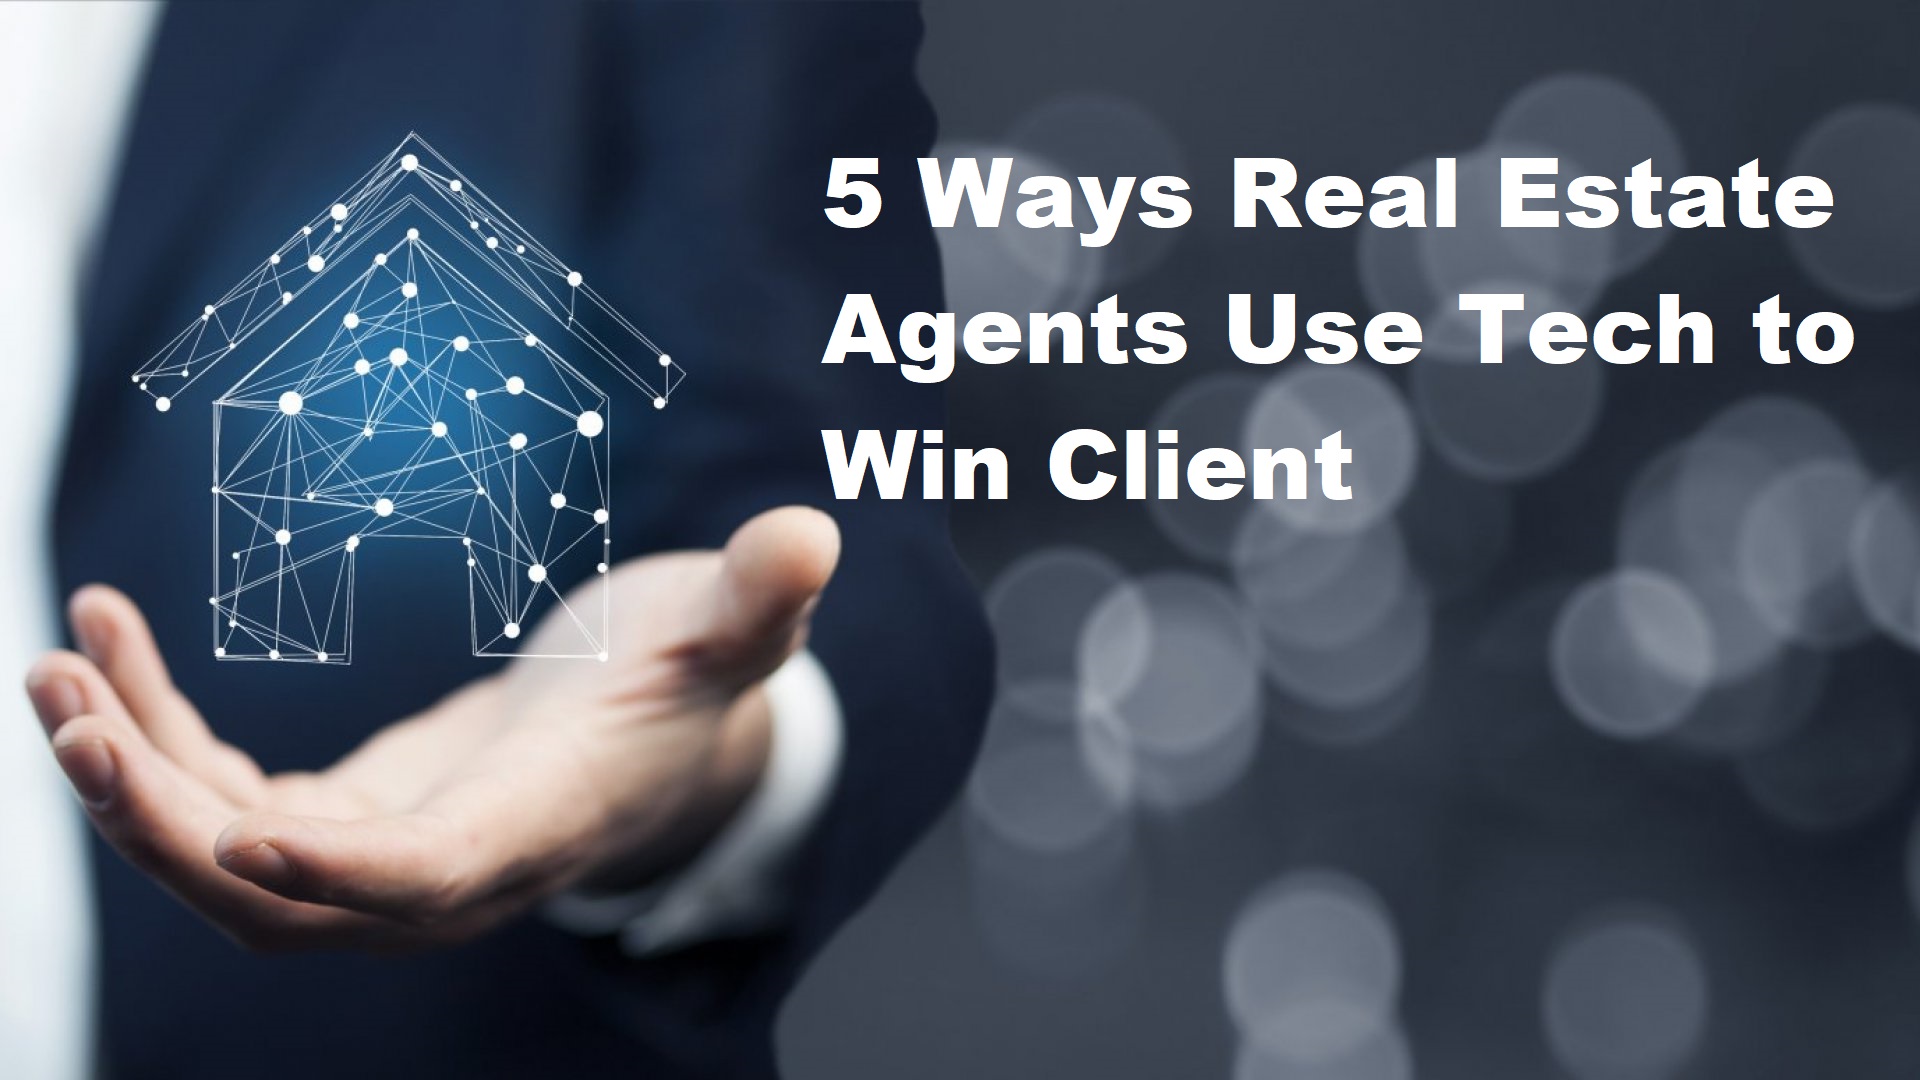 5 Ways Real Estate Agents Use Tech to Win Client